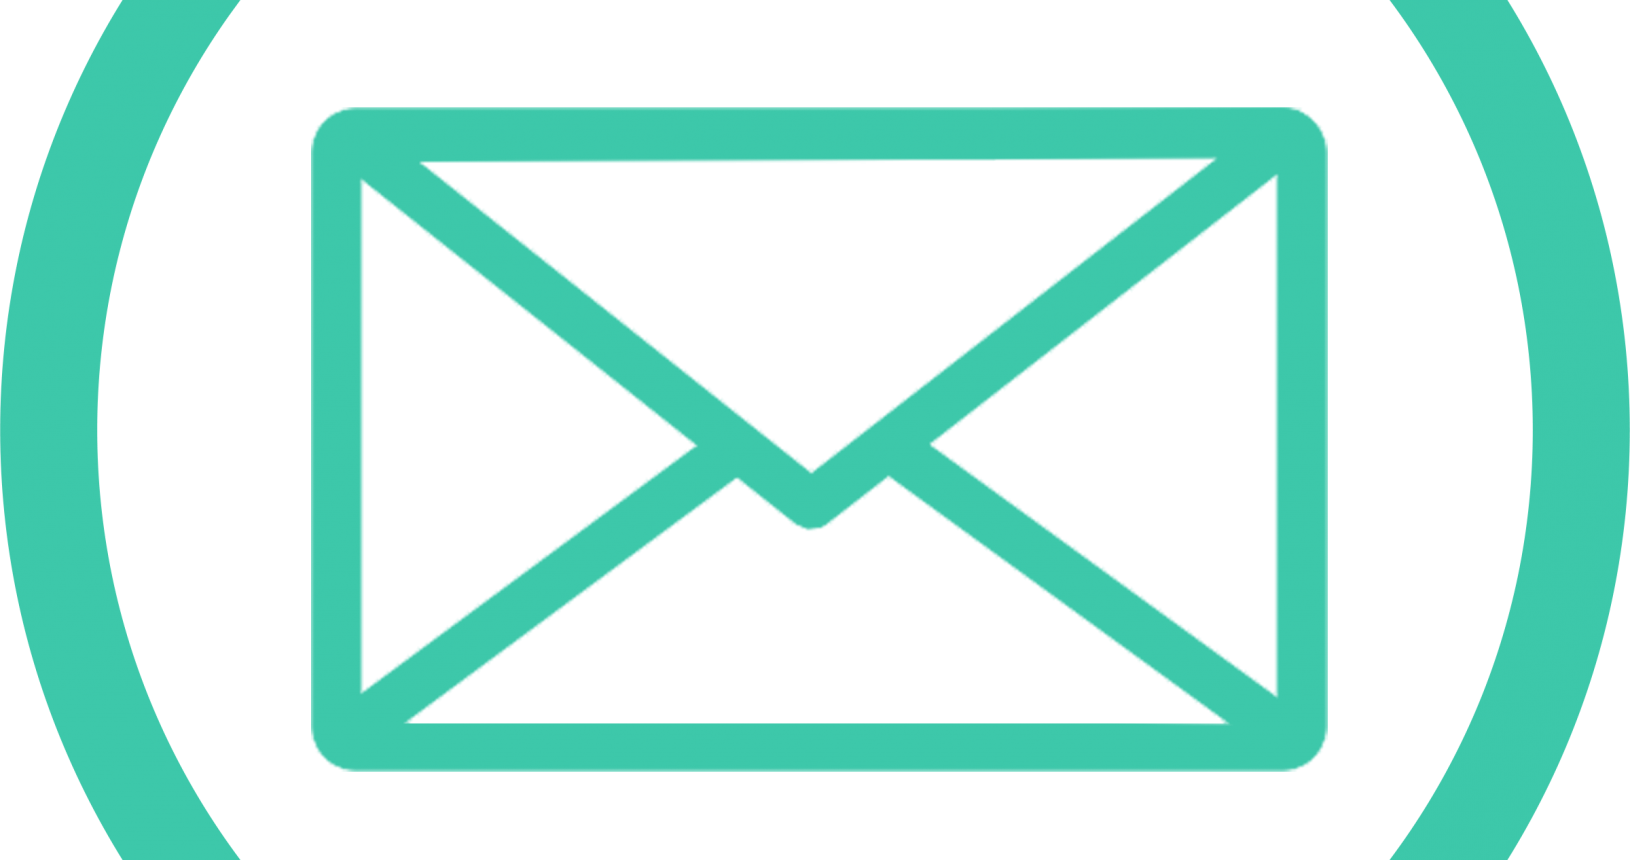 Email Icon 23 - Email Logo Jpg (1630x860)